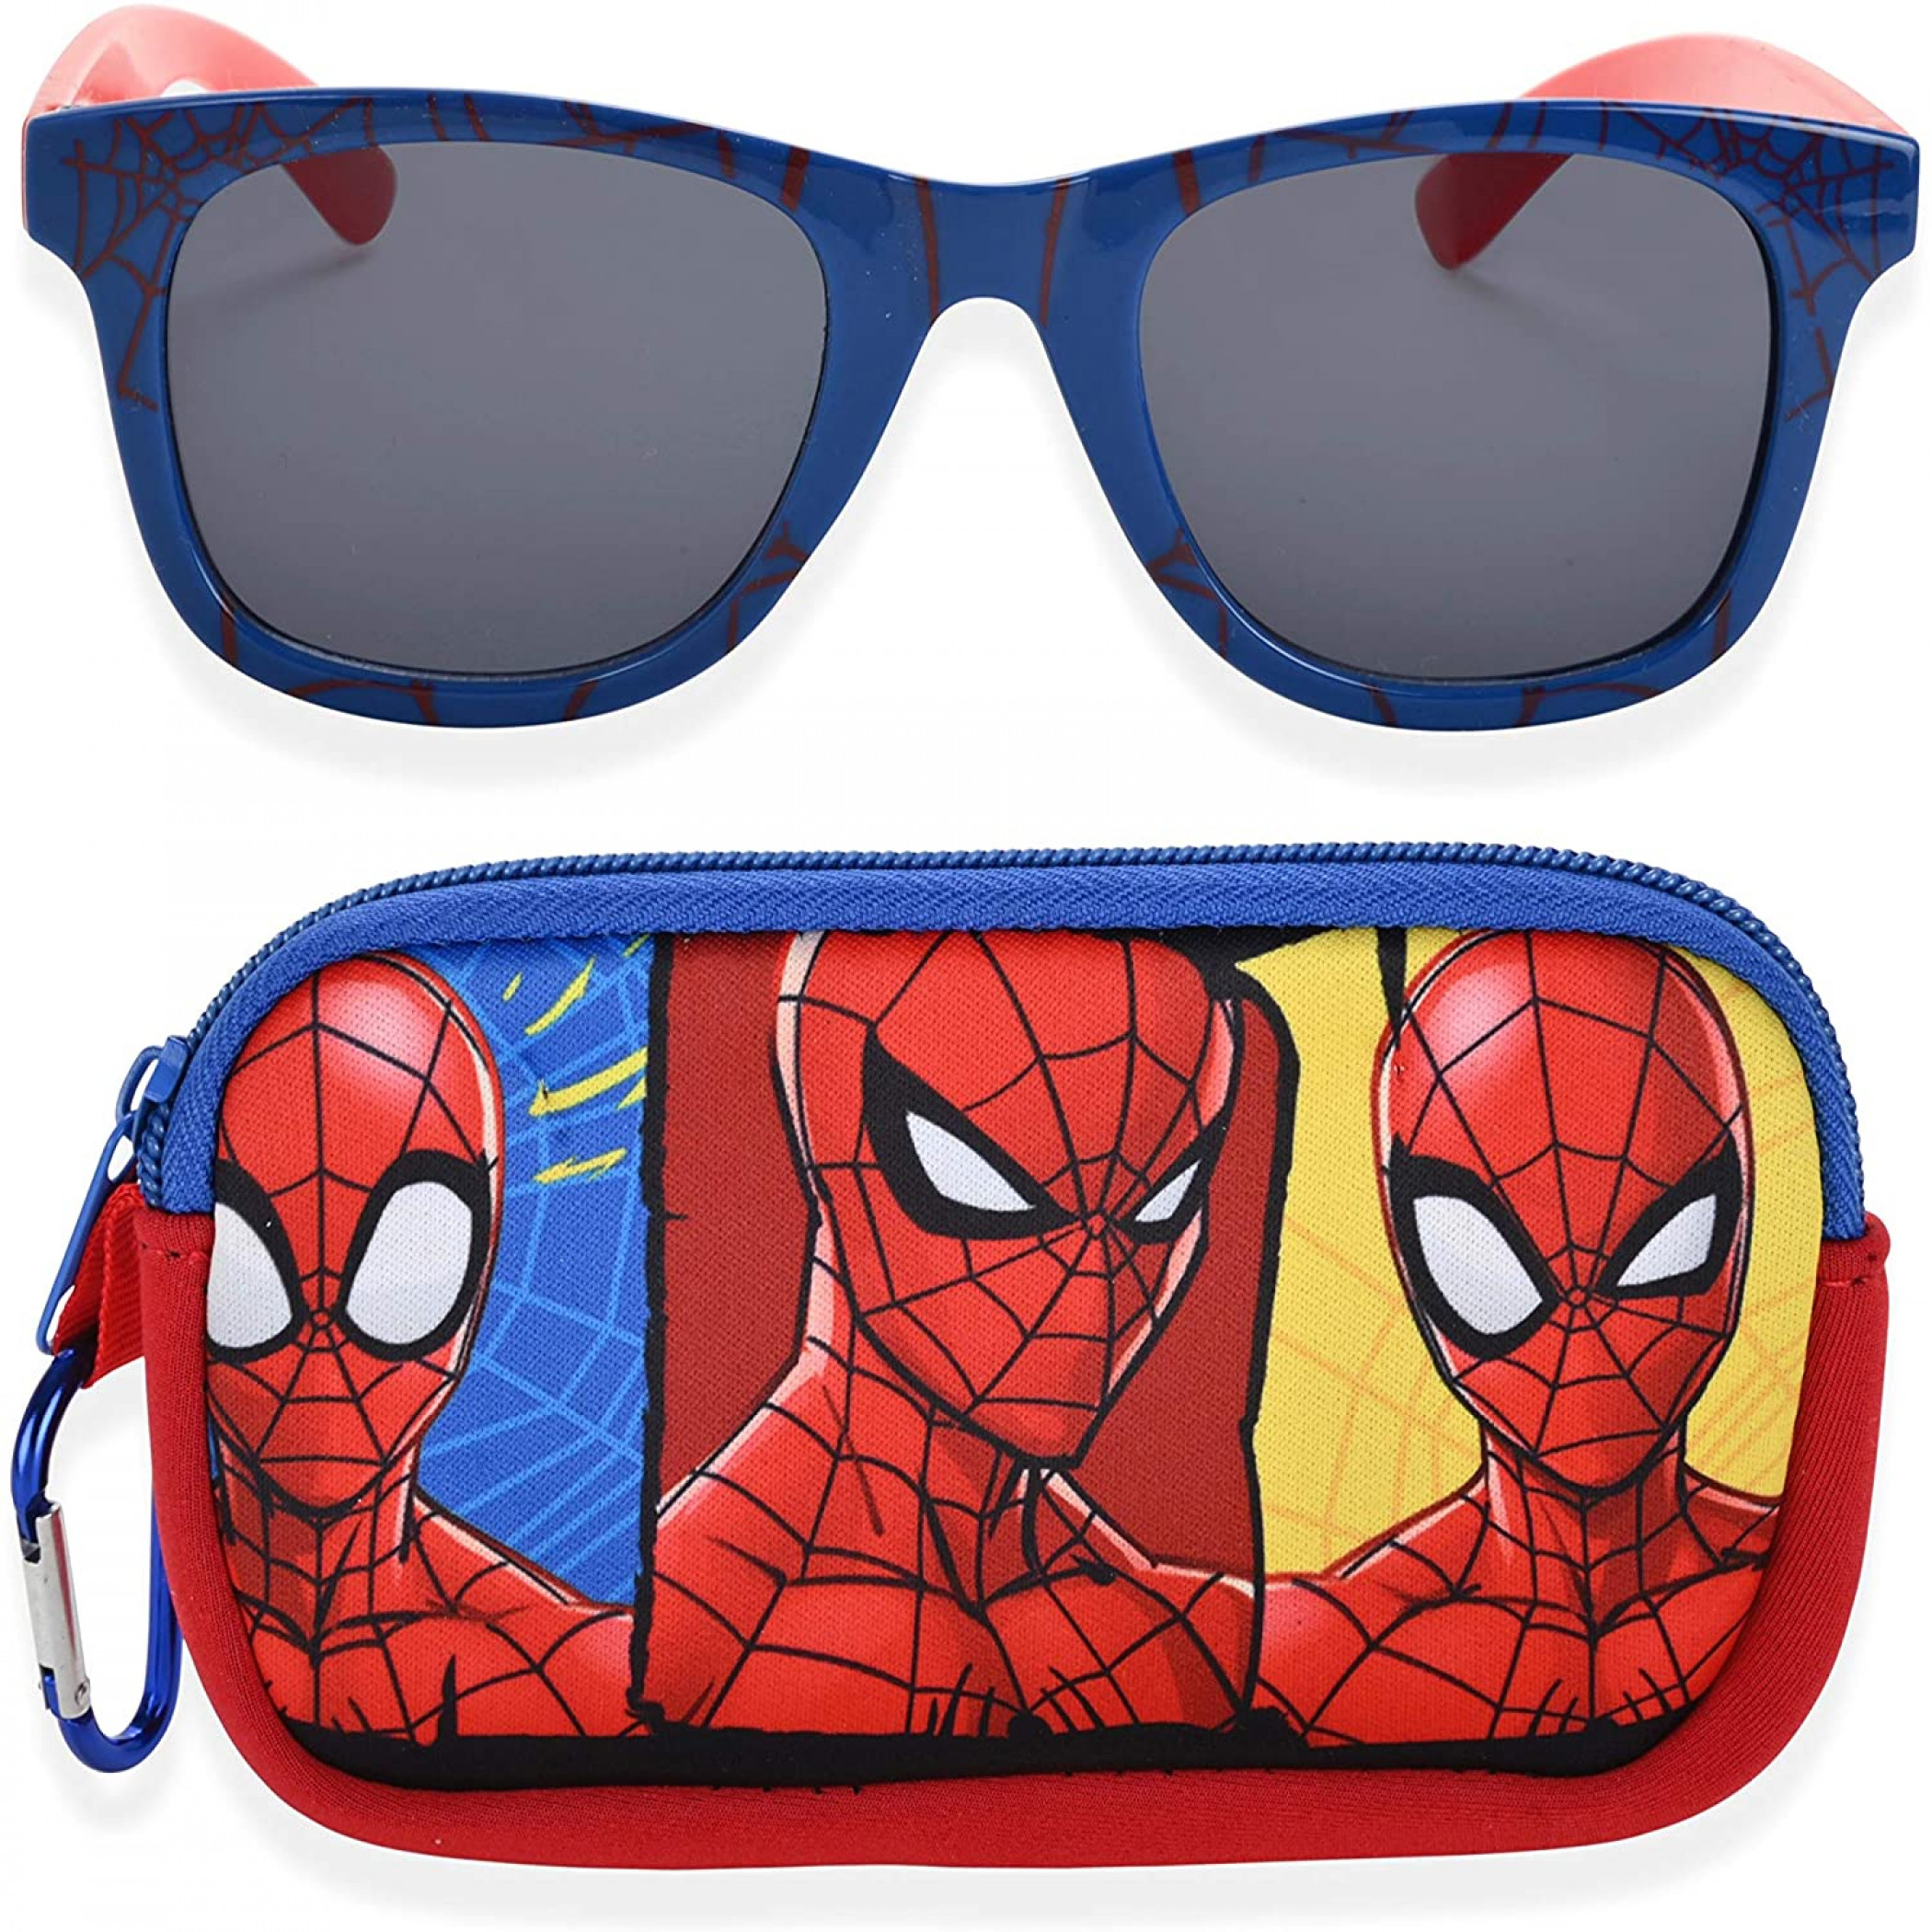 Marvel Comics Spider-Man Kids Sunglasses with Carabiner Pouch